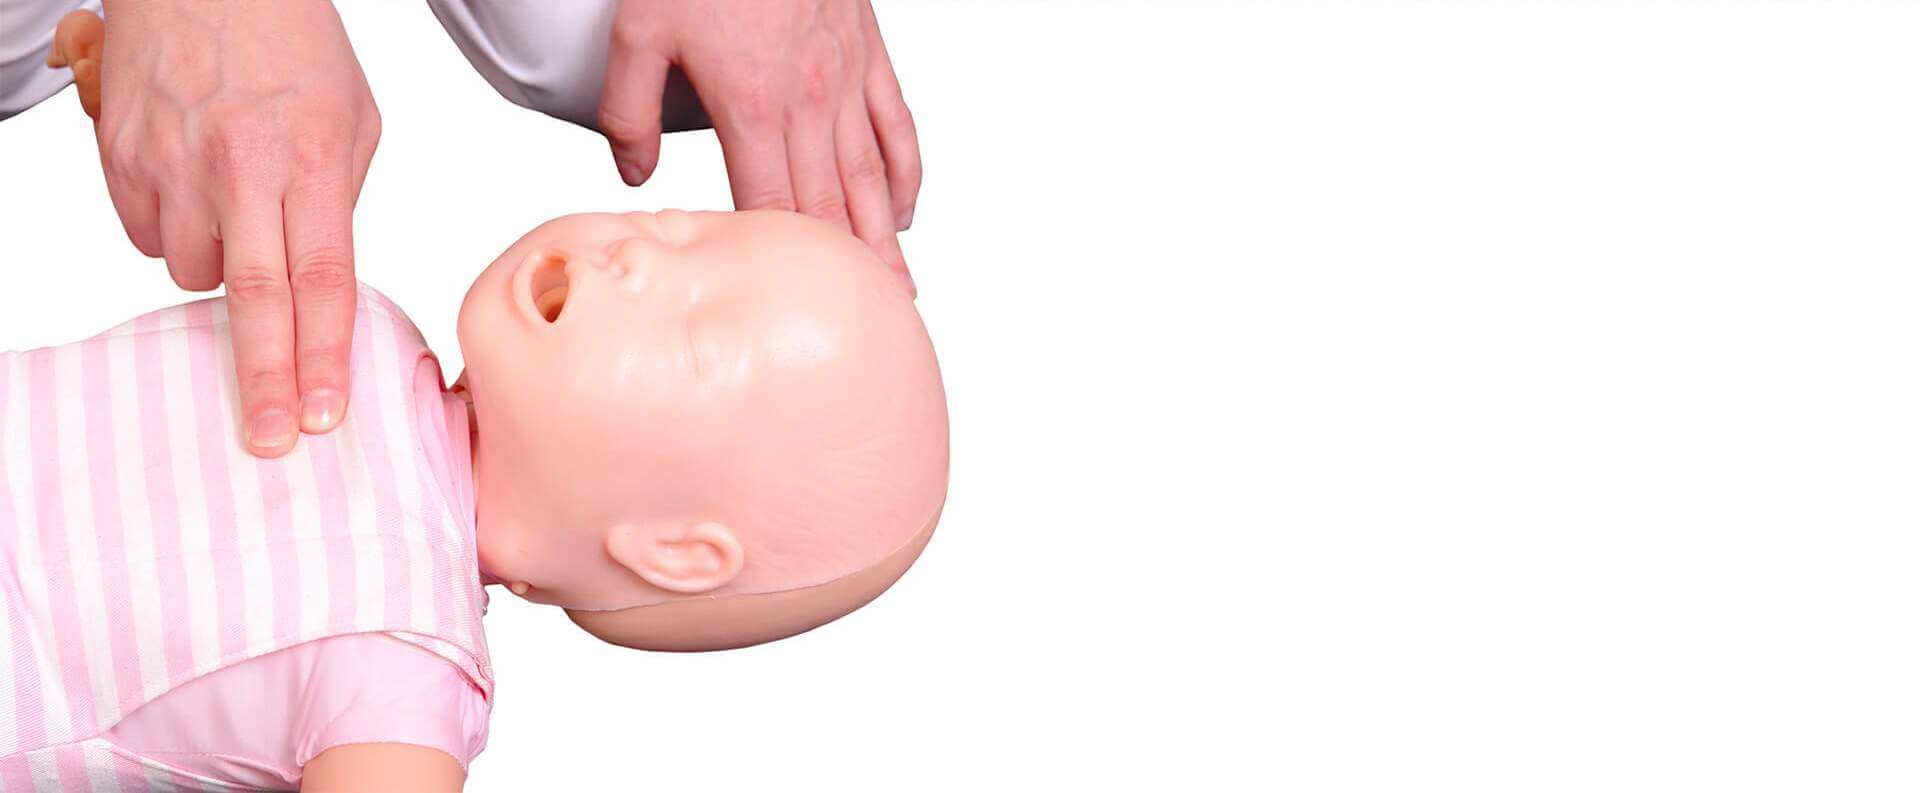 Close up of hands performing a CPR on a baby